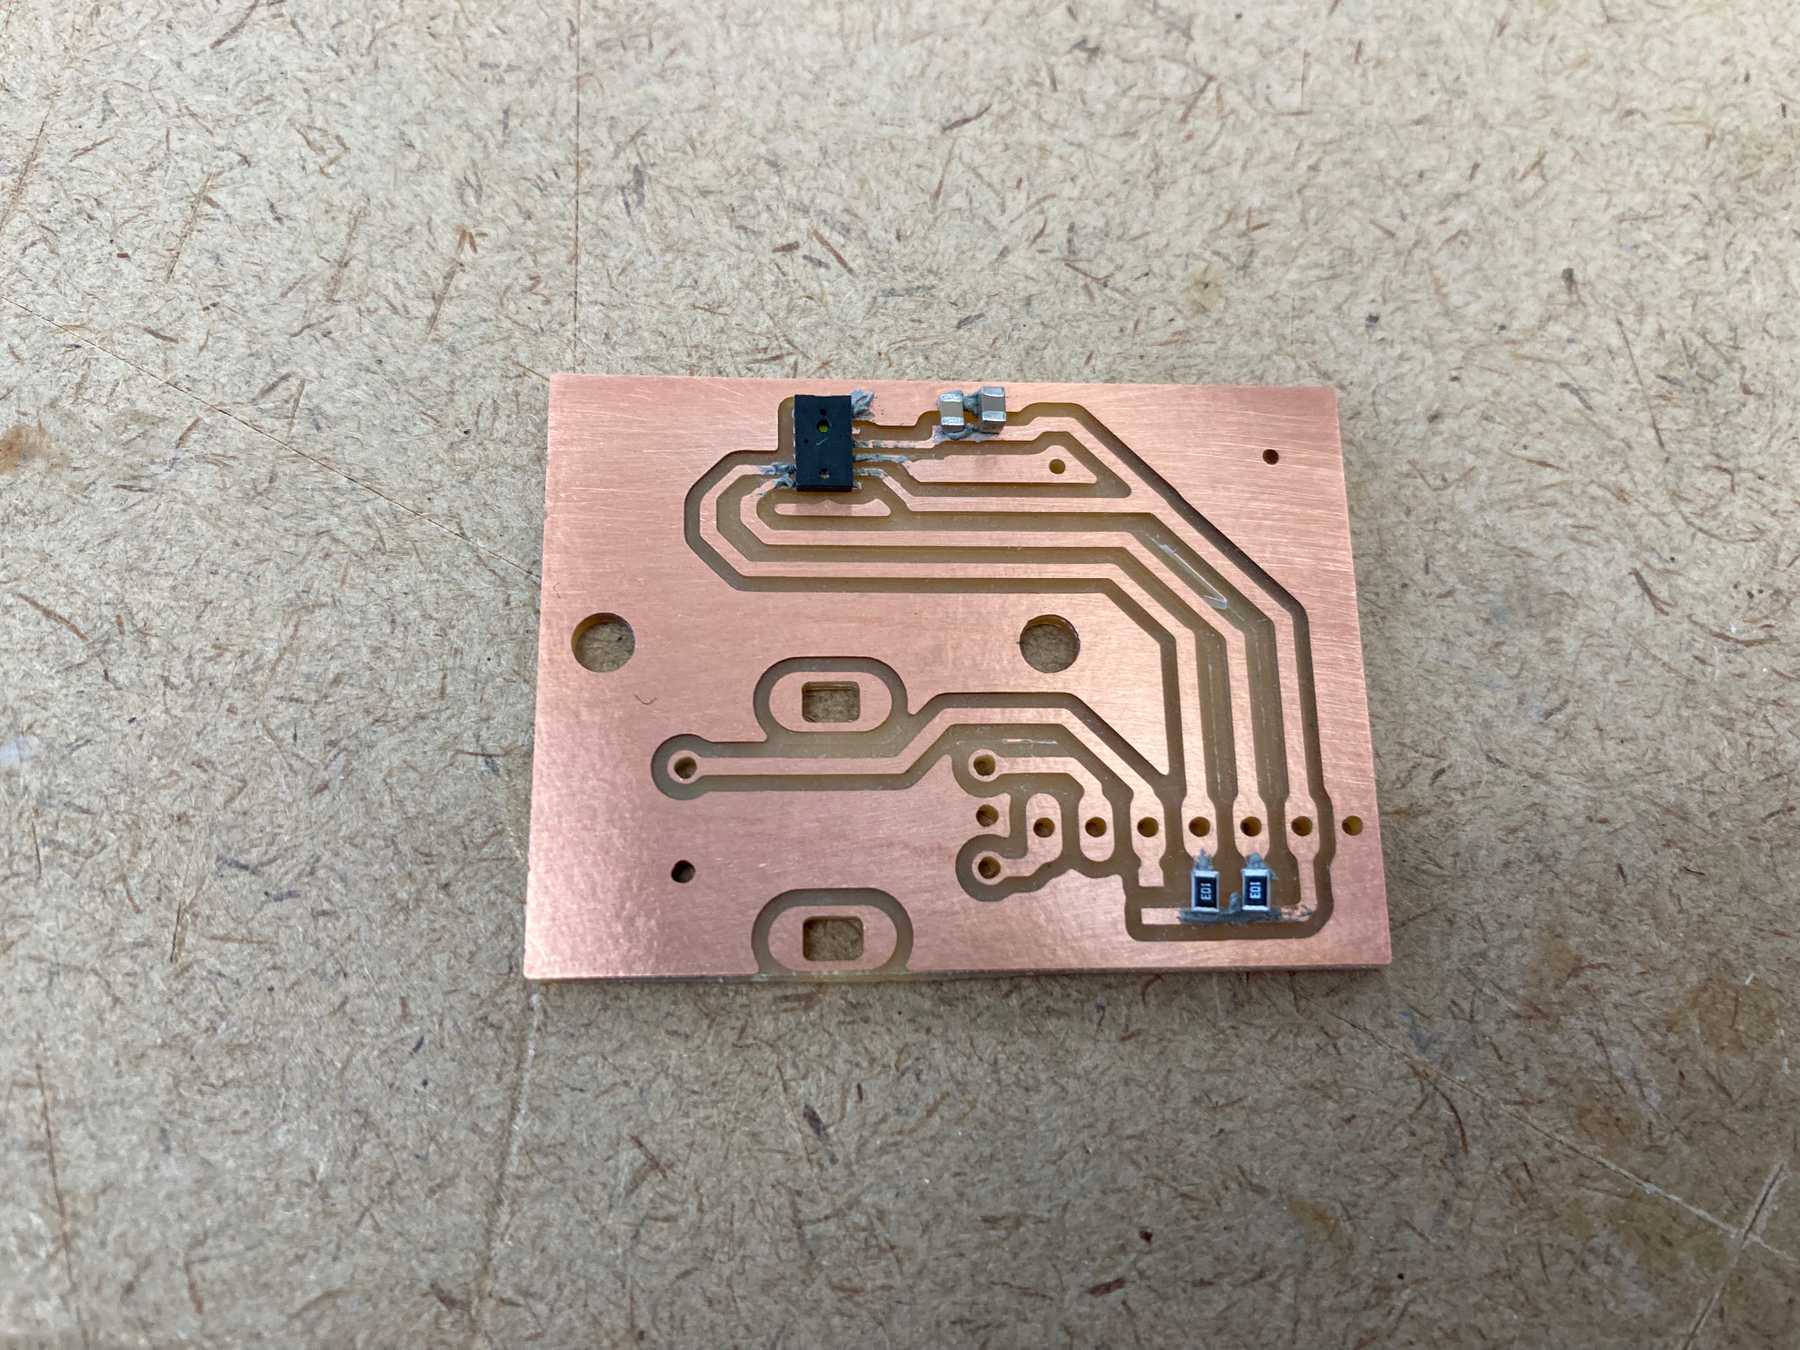 Adding the components with solder paste